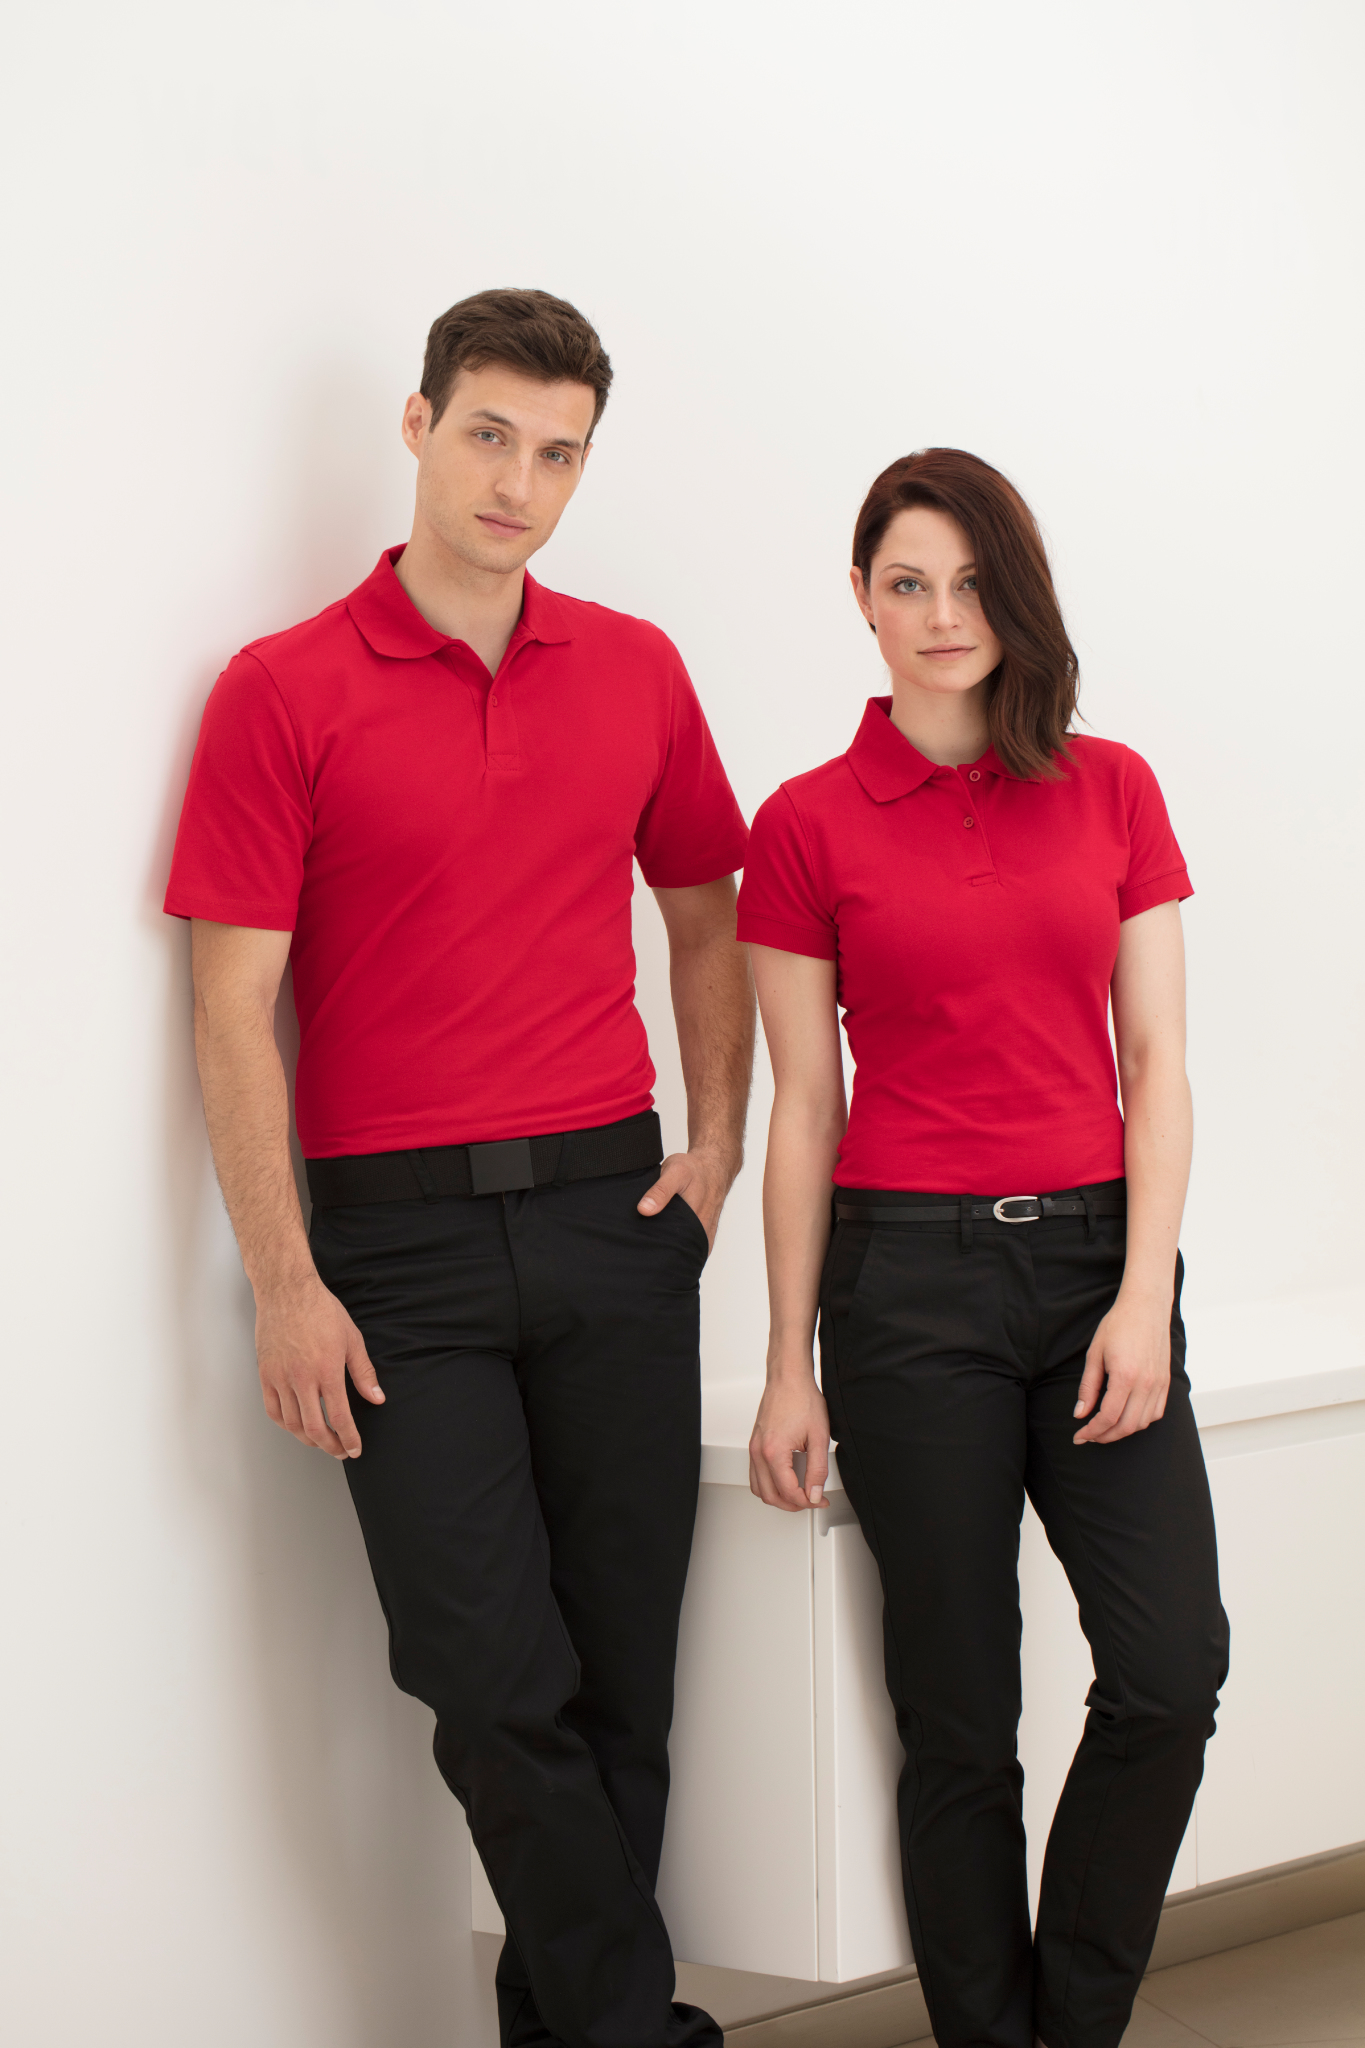 The Limitations of the High Street for Workwear